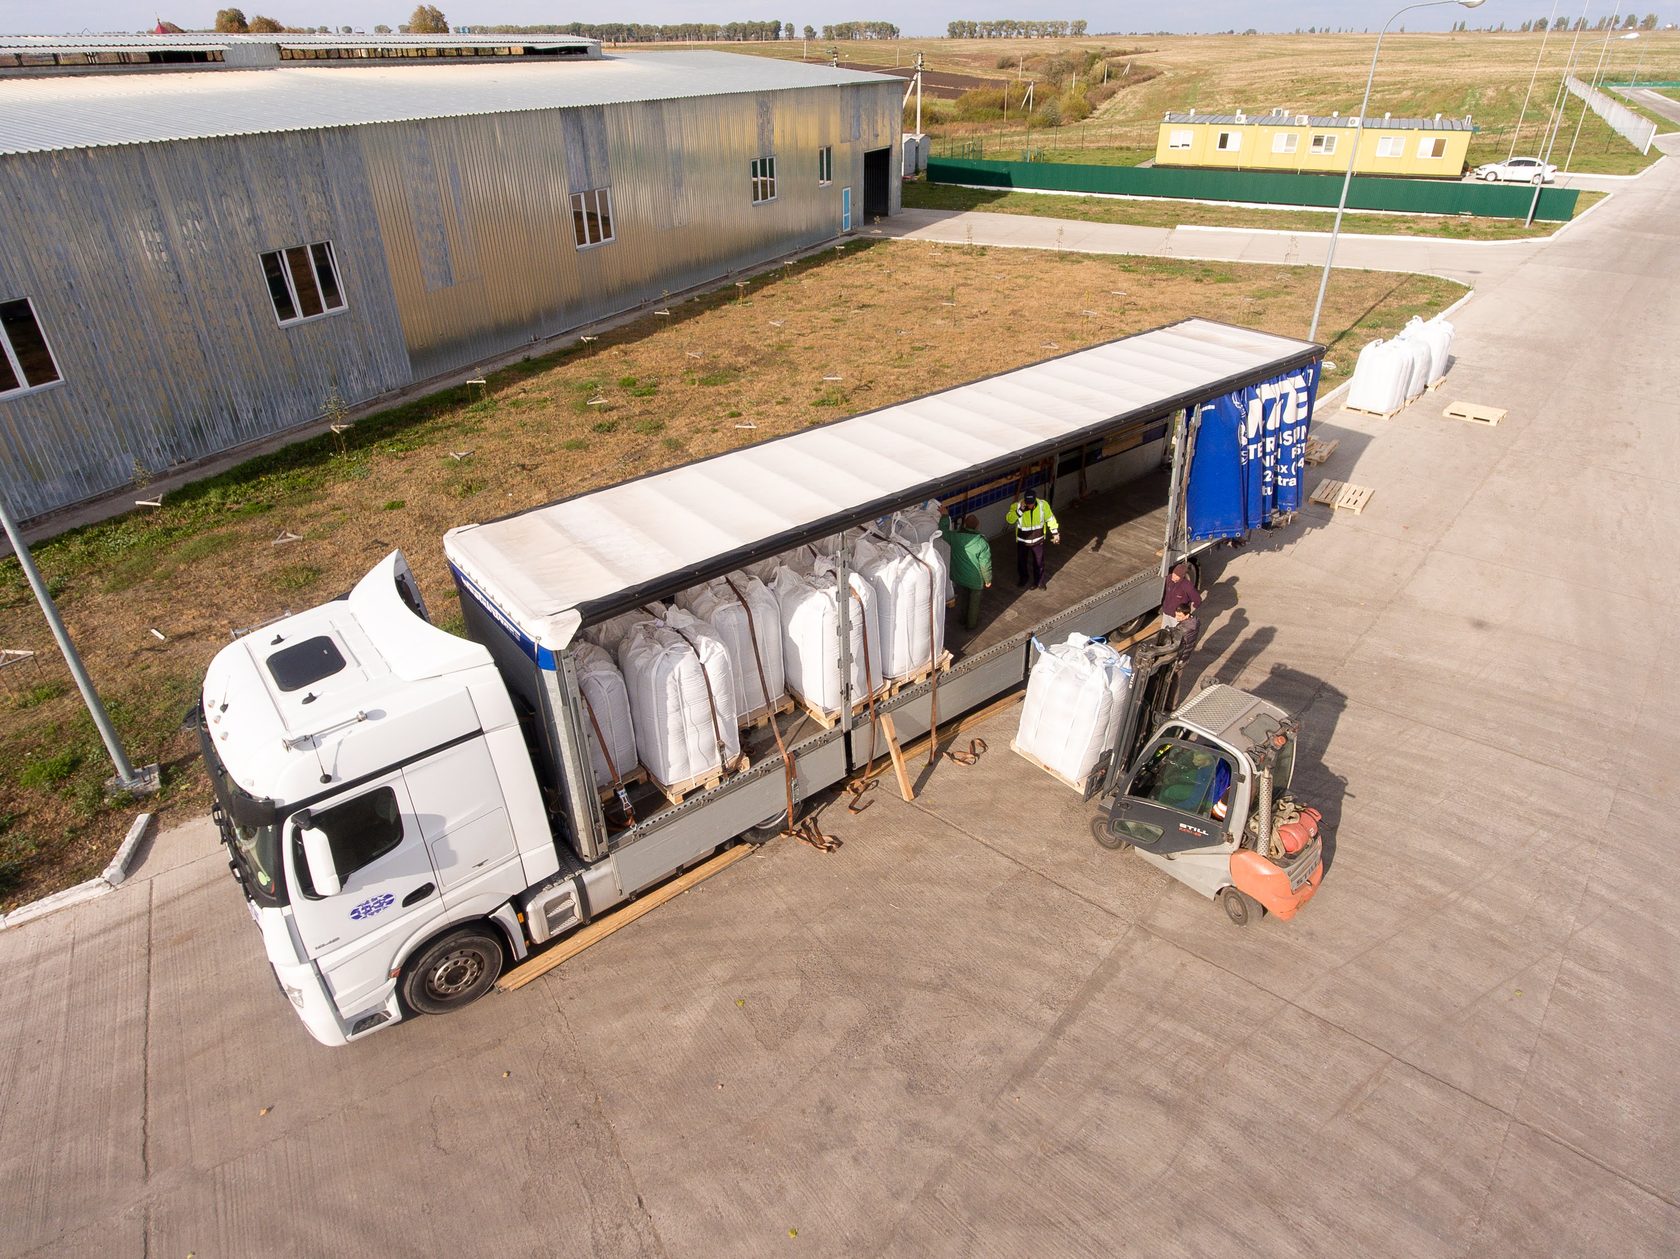 Loading of seed bags